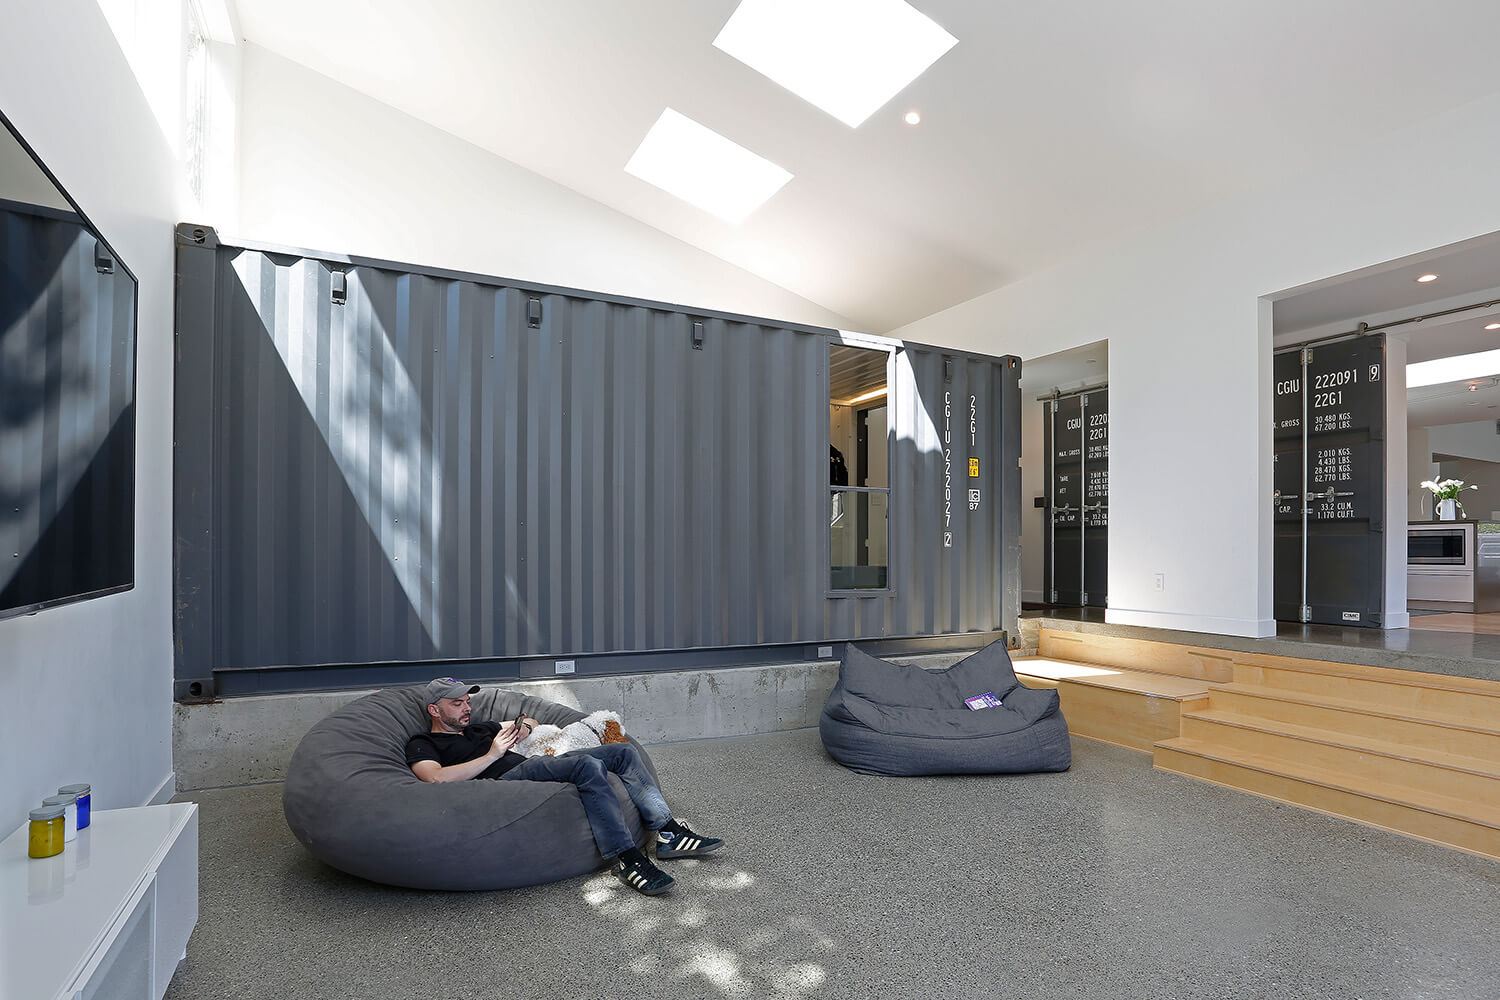 Wyss Family Container House by Paul Michael Davis Architects